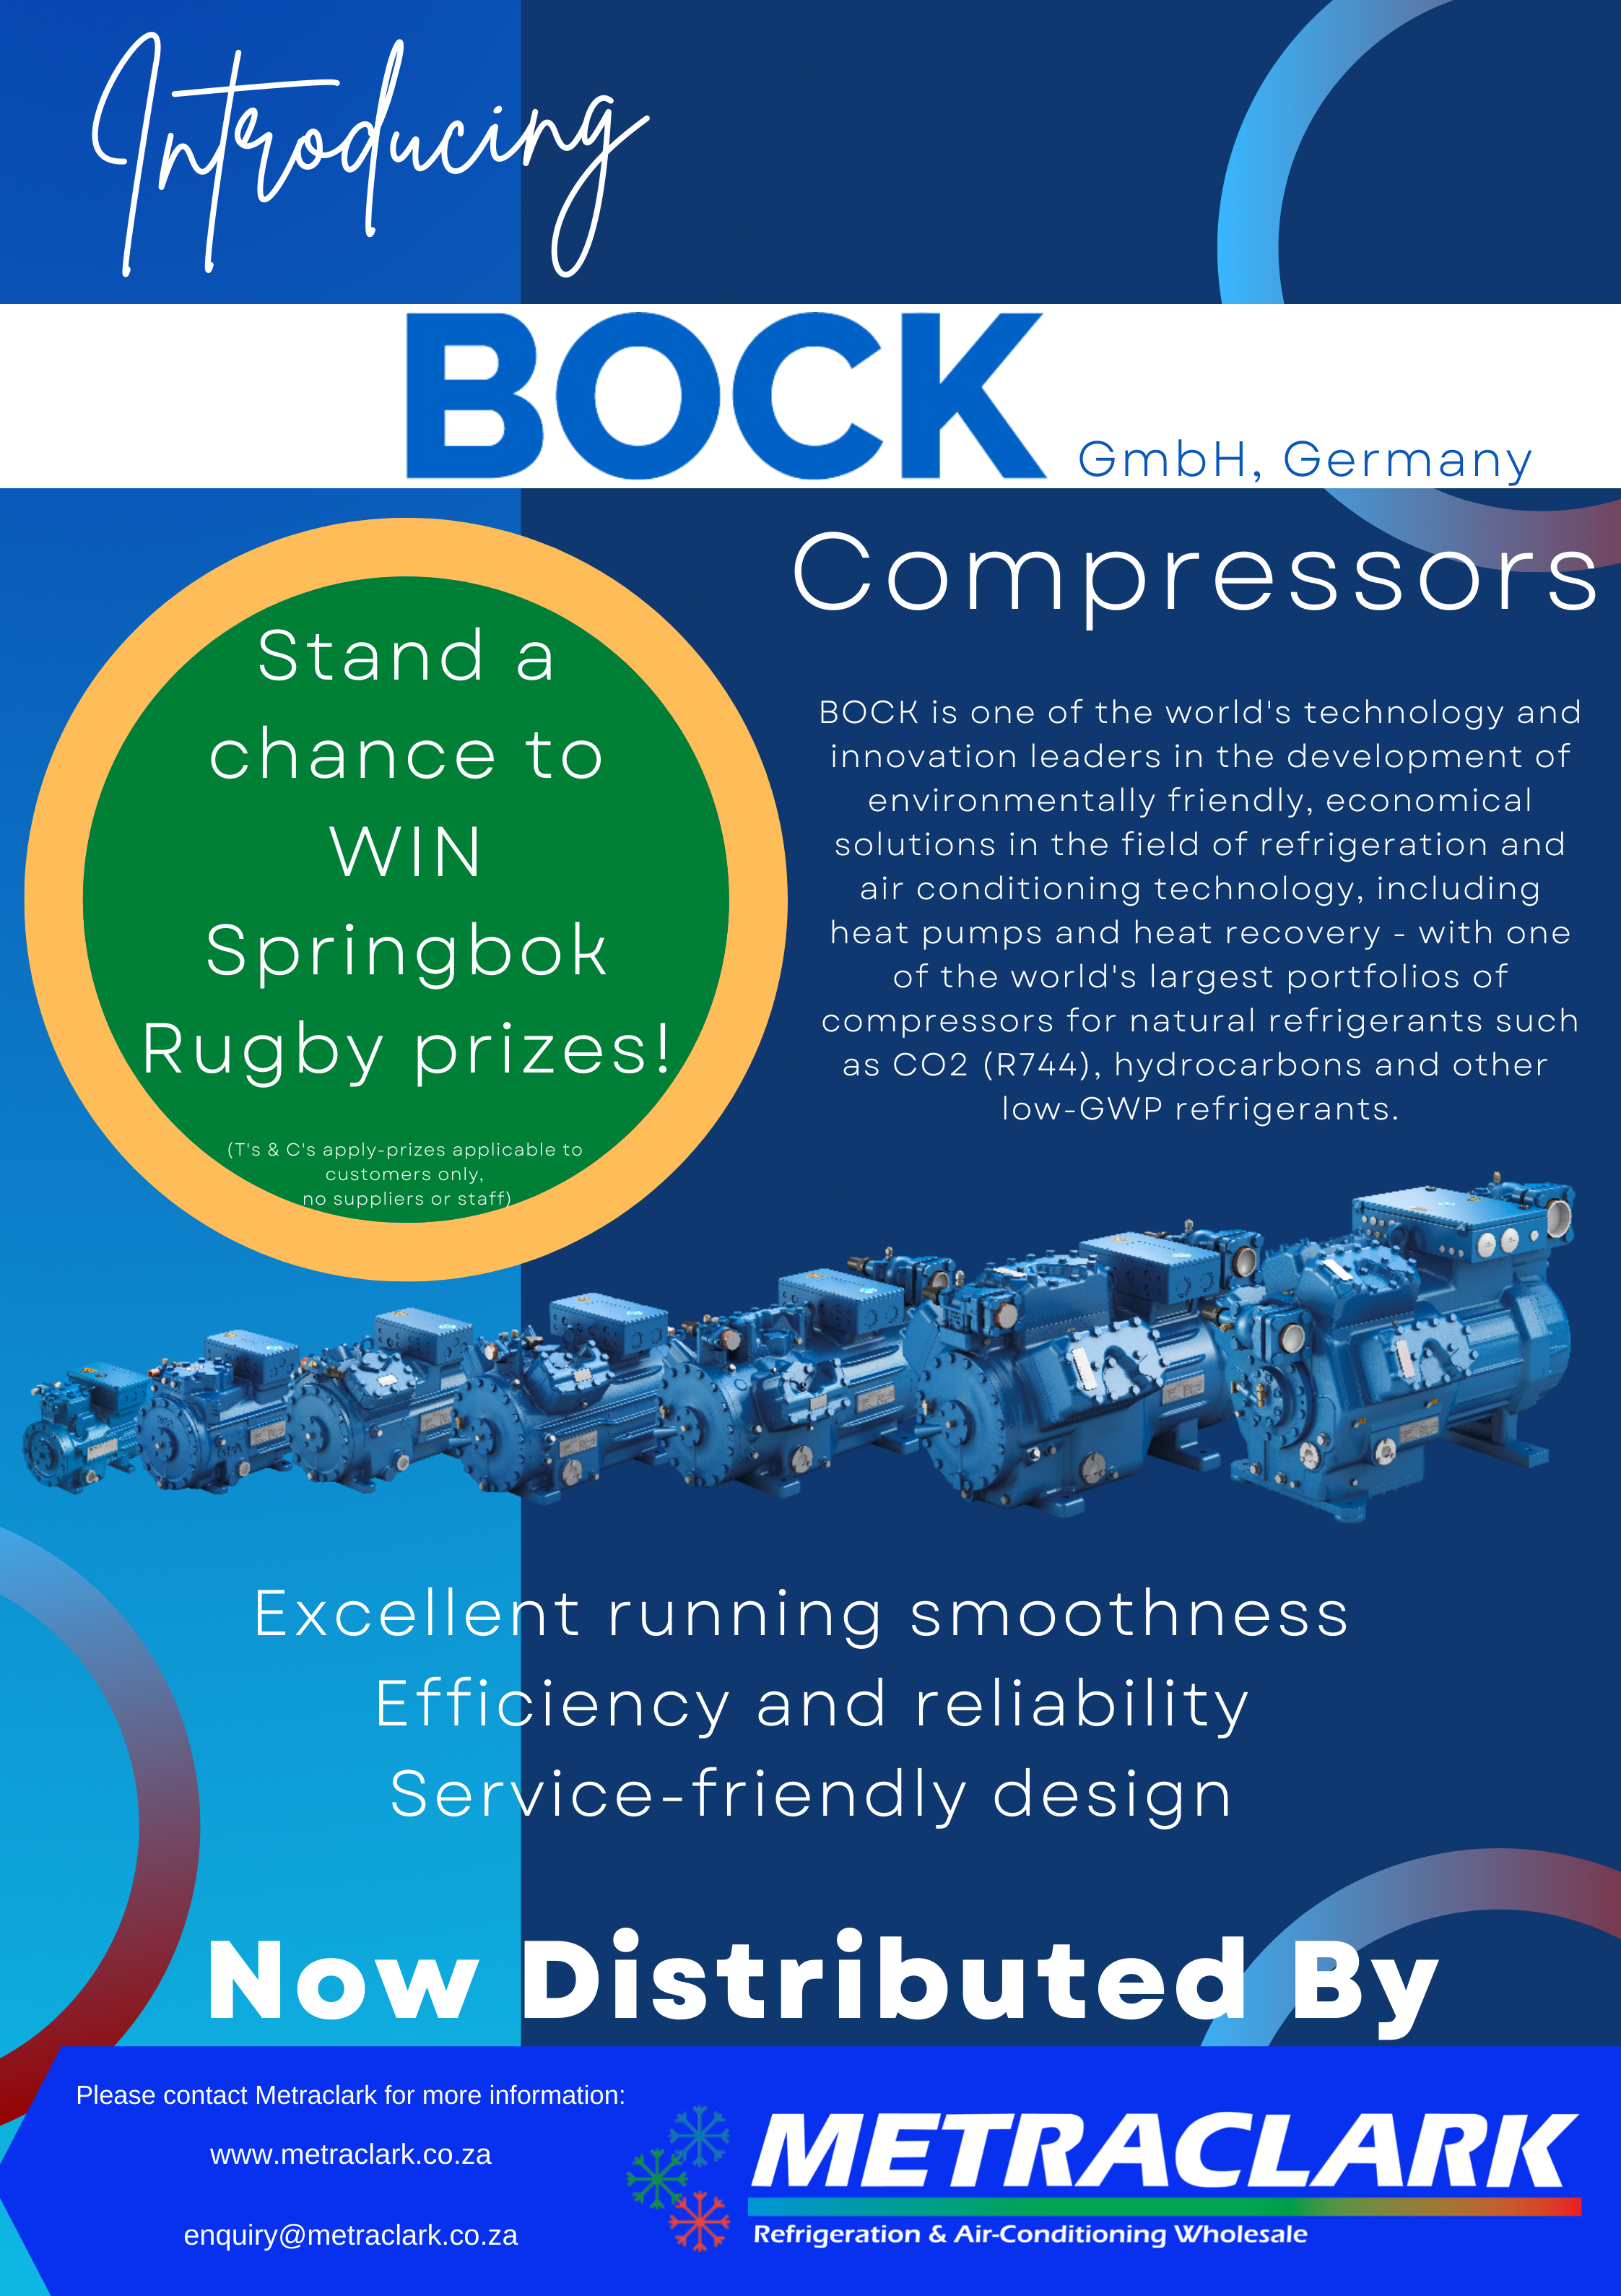 Purchase a Bock Compressor and Stand a Chance to WIN Springbok Rugby Prizes!